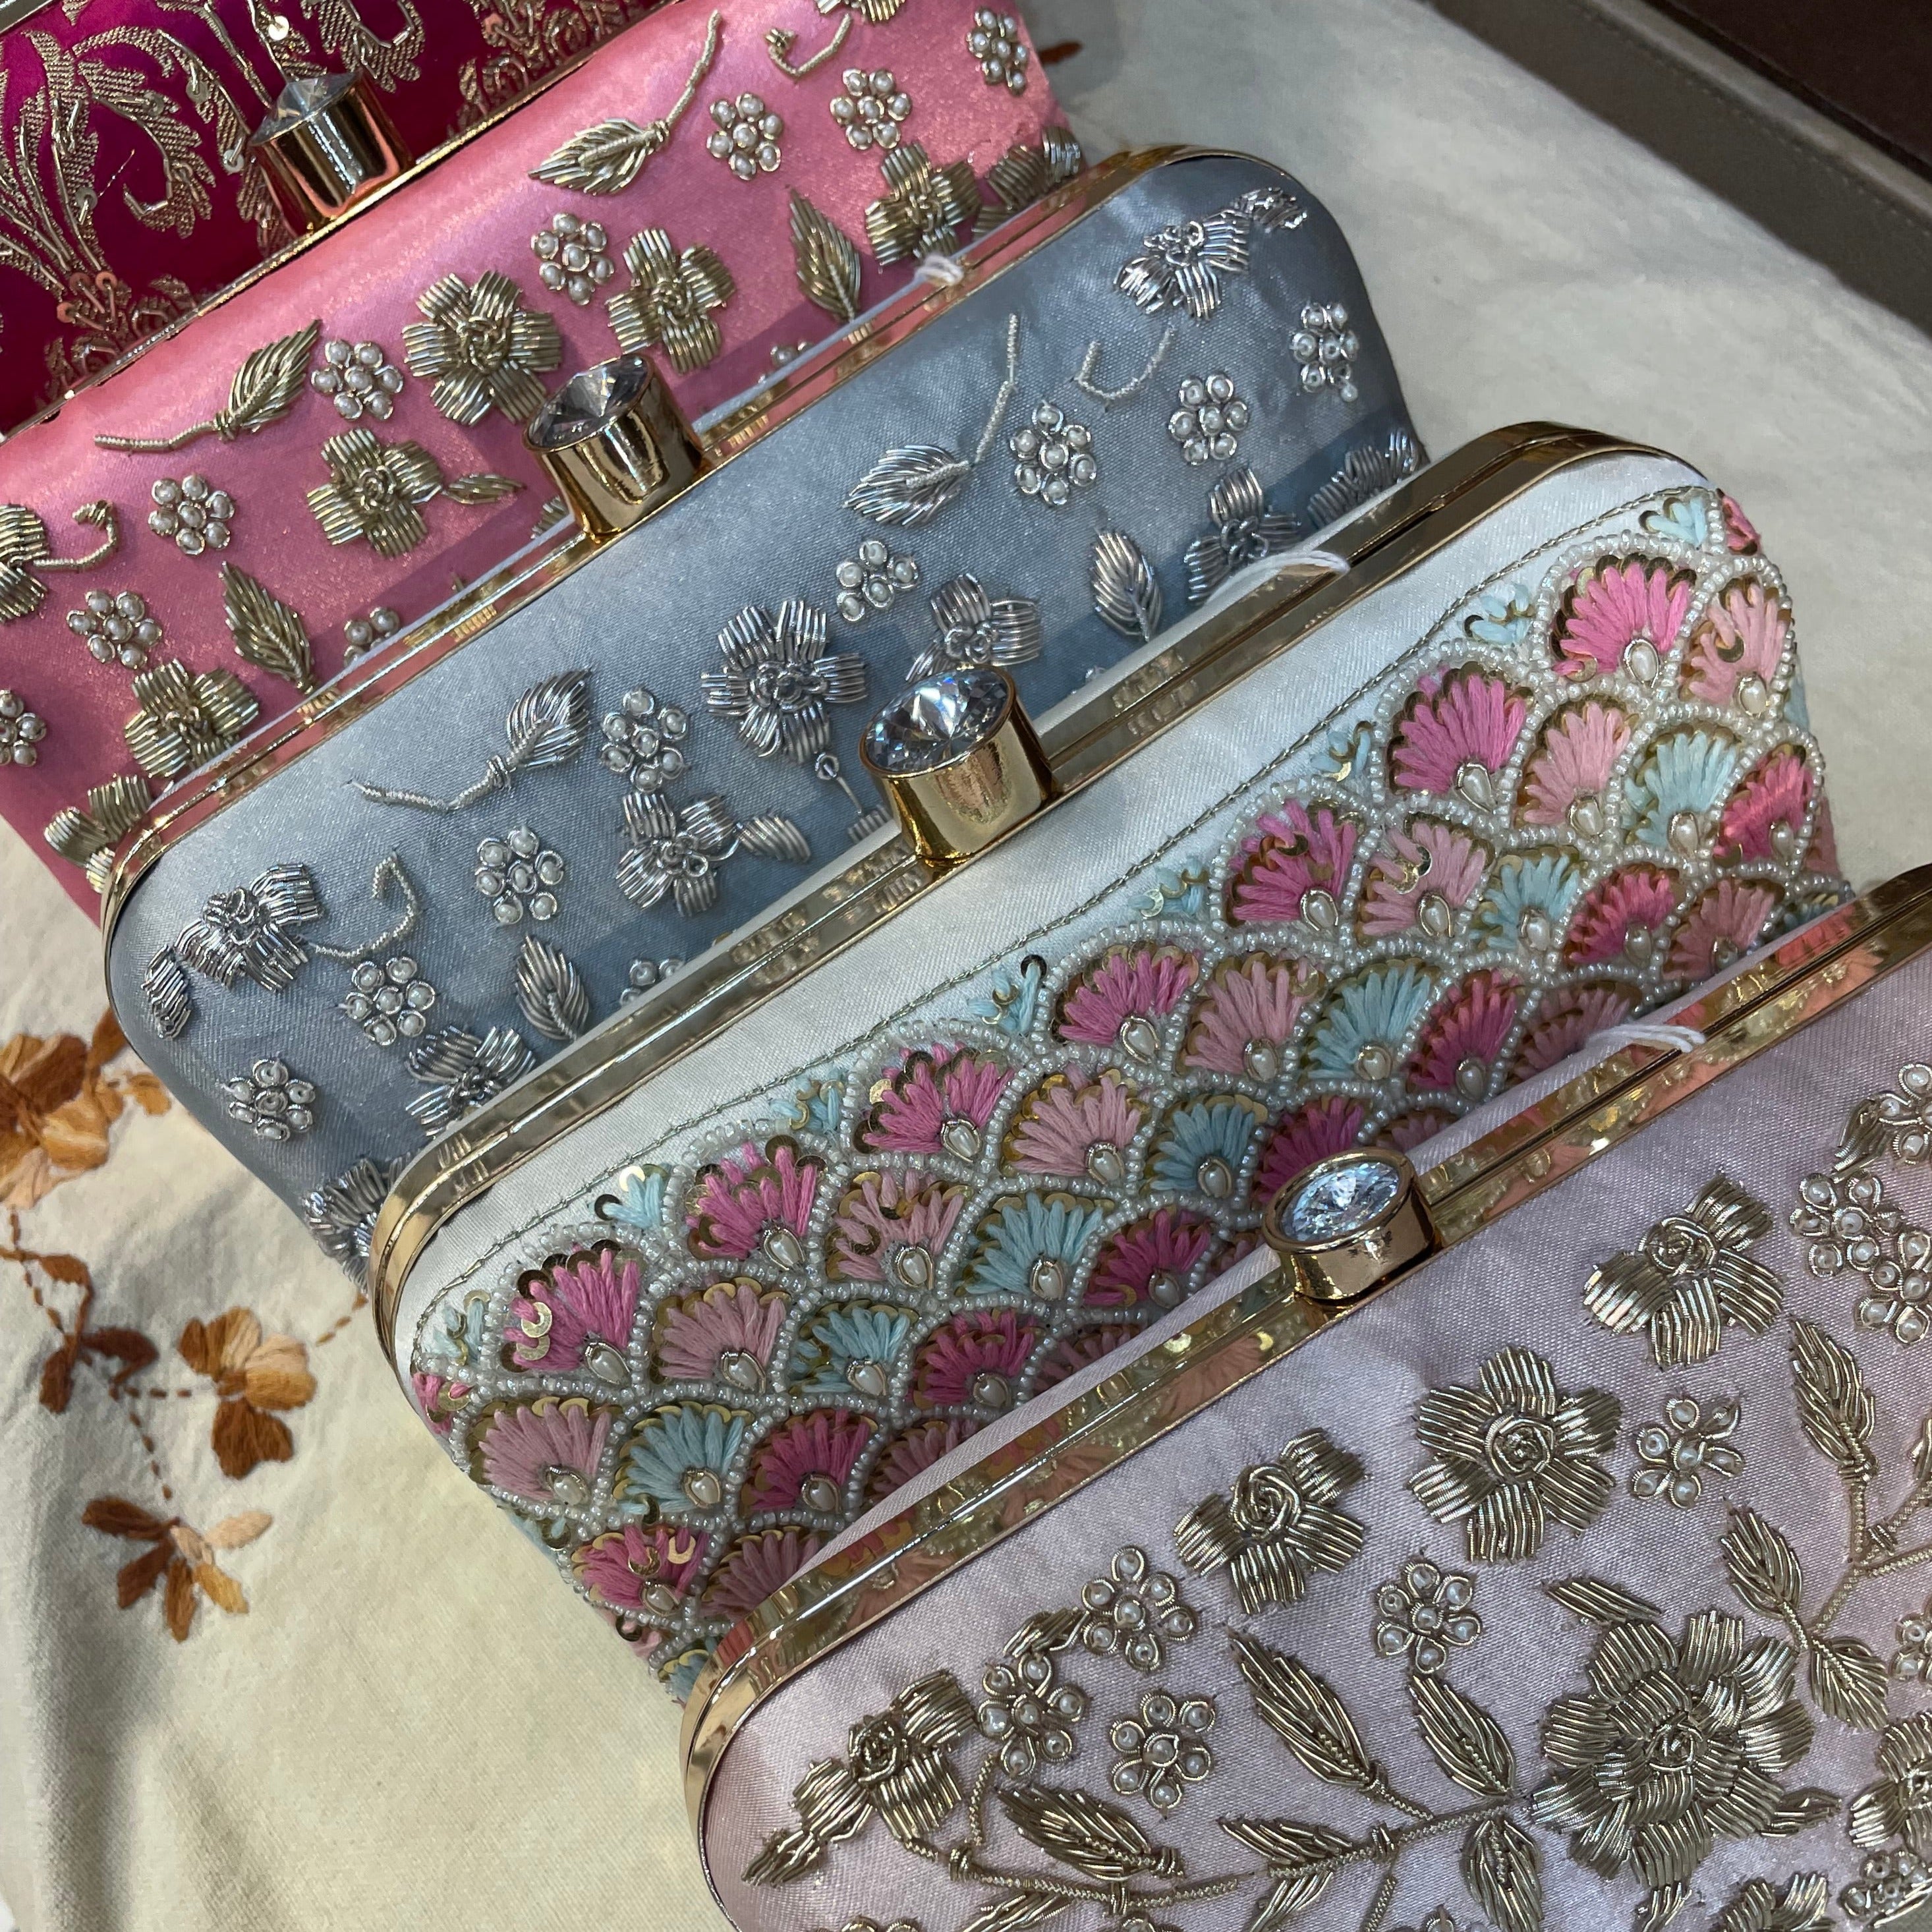 Zardozi Thread and Pearl Clutches (Set of 4)